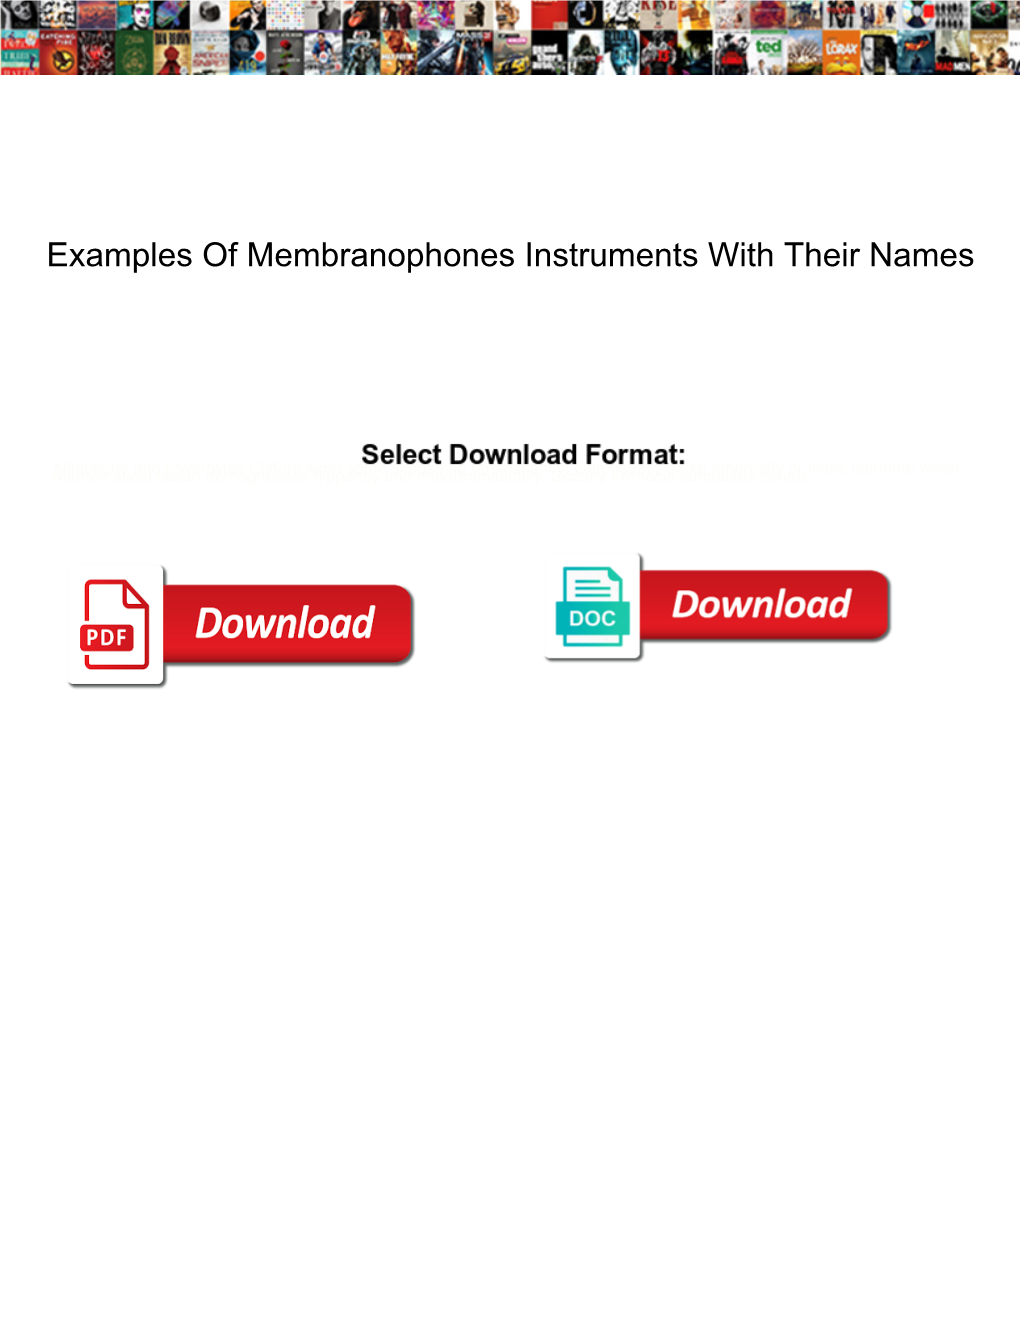 Examples of Membranophones Instruments with Their Names